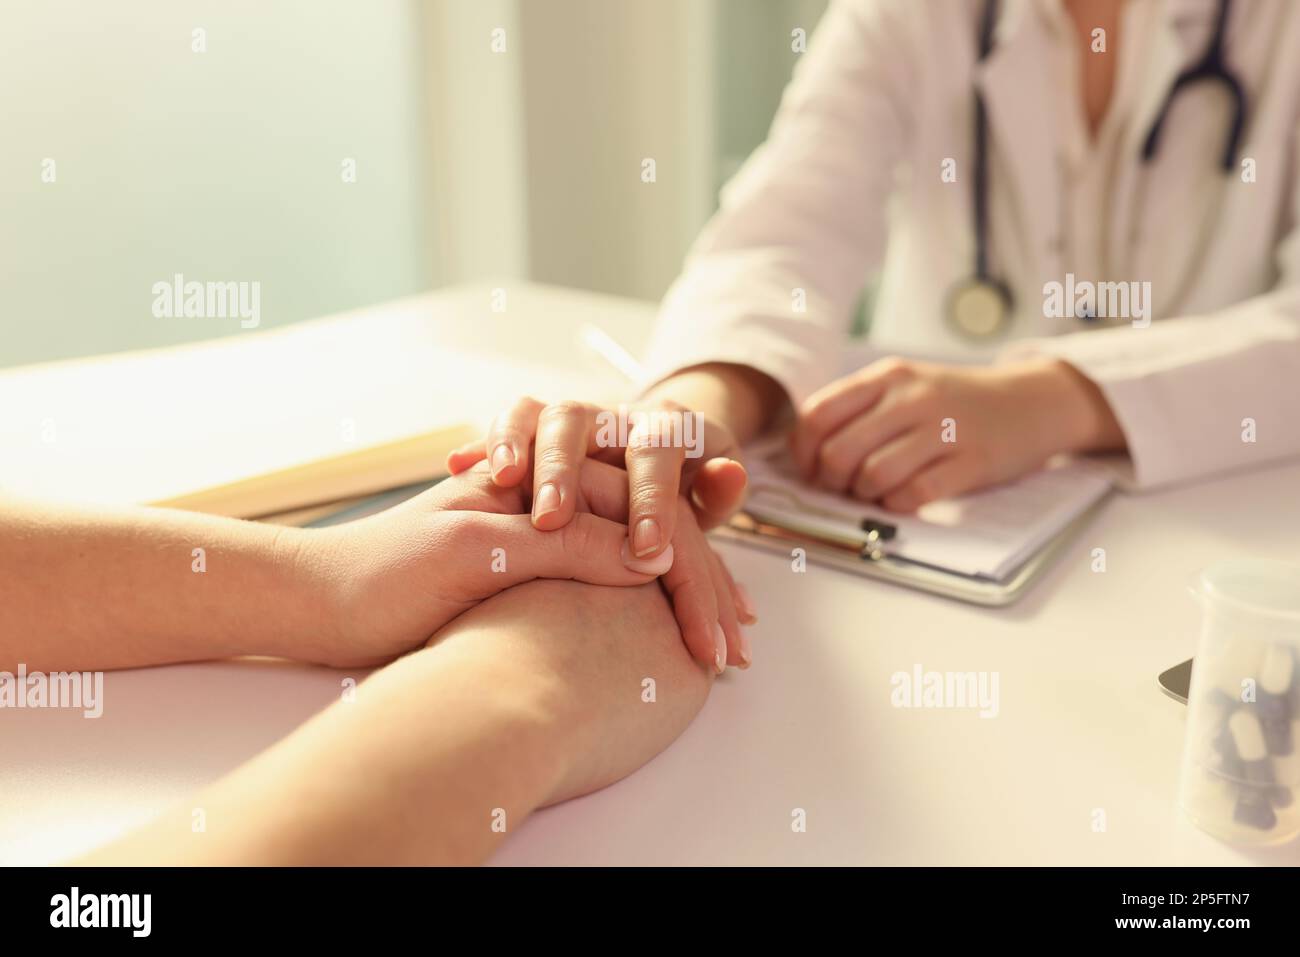 Doctor puts her hand on hands of patient, sitting with her in medical clinic. Stock Photo